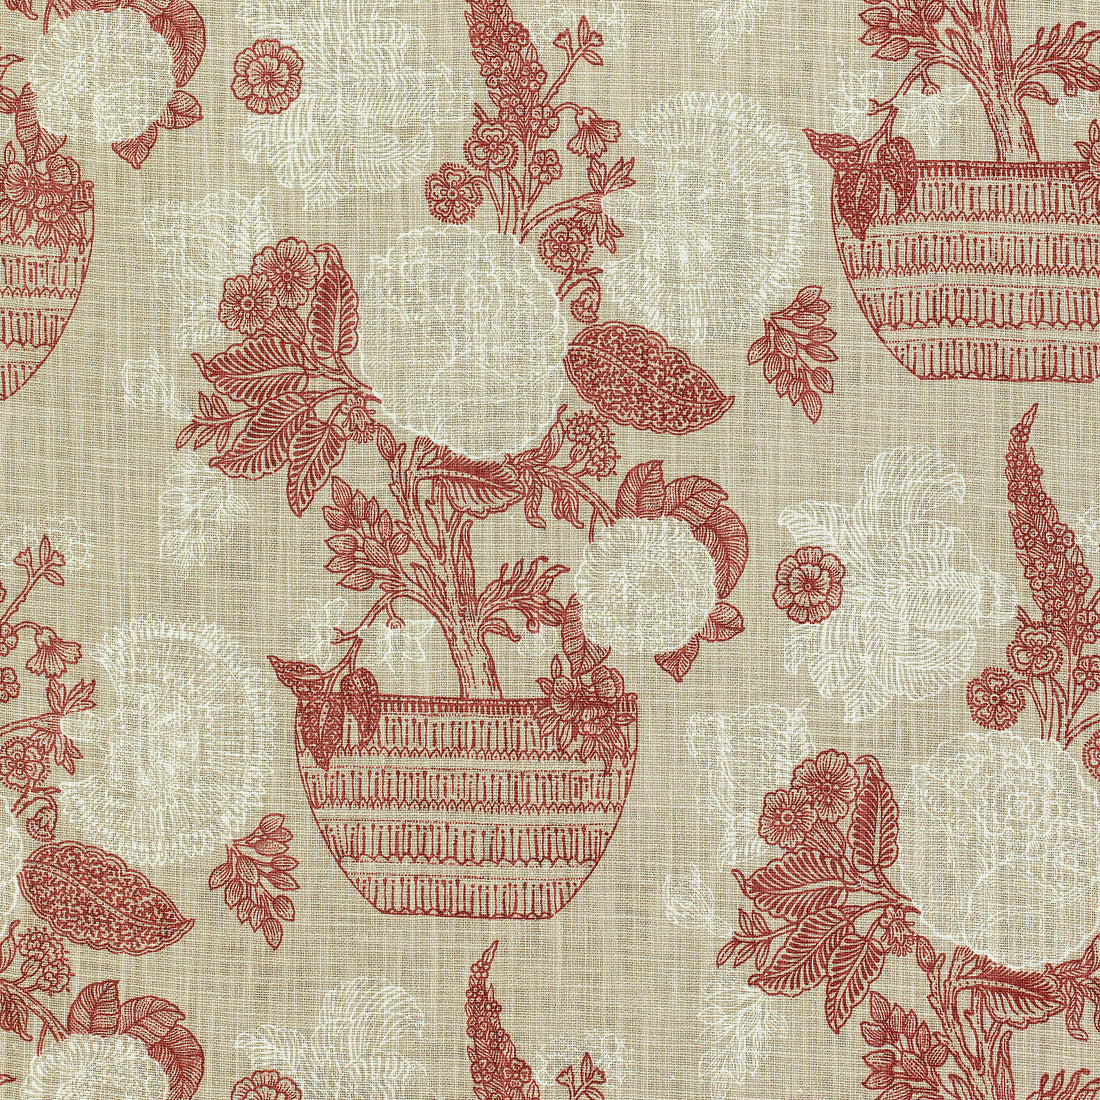 Tullamore fabric in red and cream color - pattern number F972590 - by Thibaut in the Chestnut Hill collection